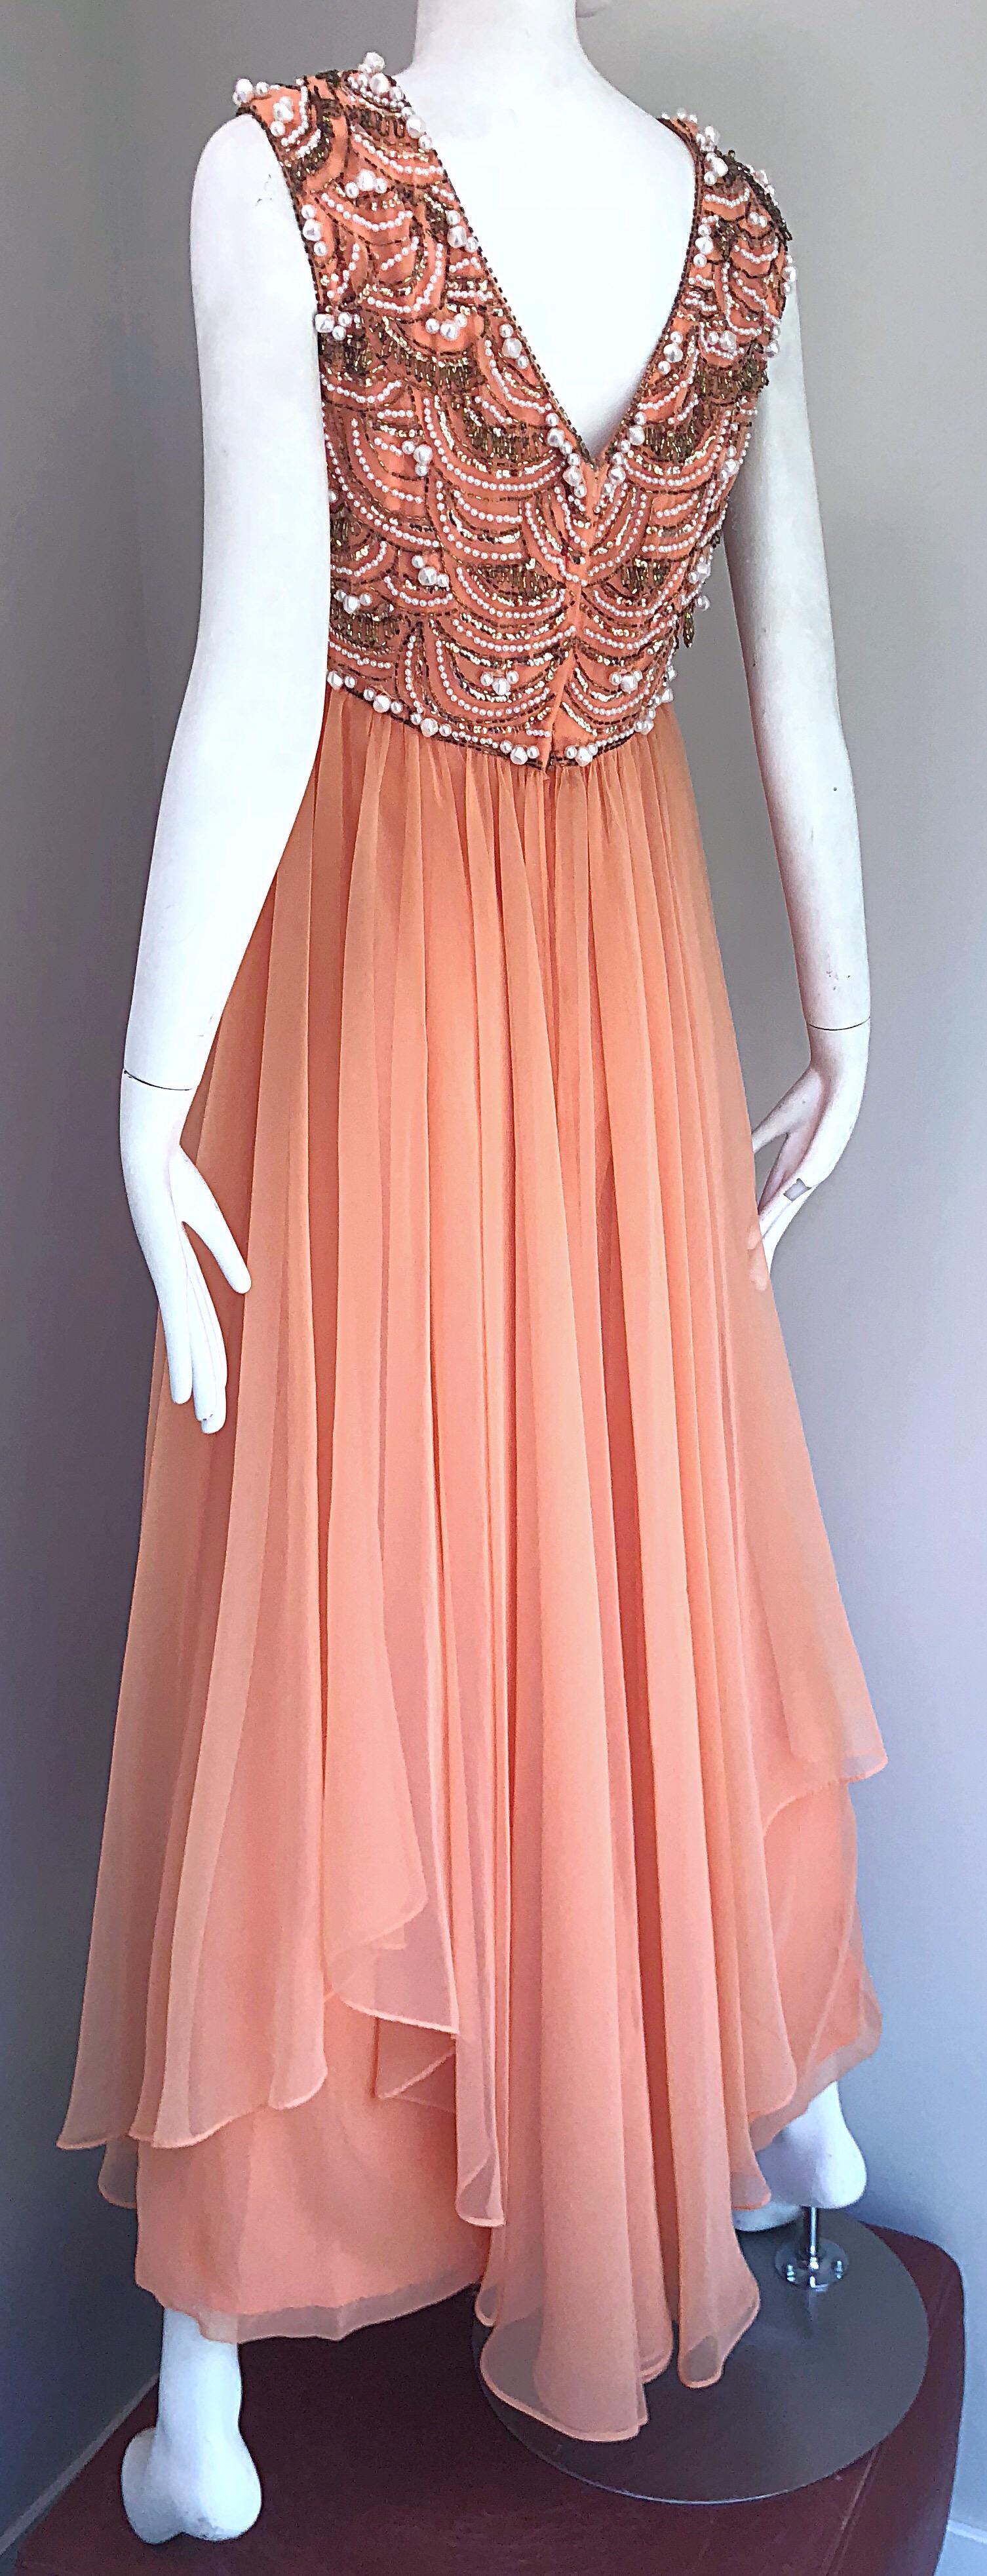 1960s Isabell Gerhart Sherbet Coral Demi Couture Beaded Chiffon 60s Gown Dress For Sale 6